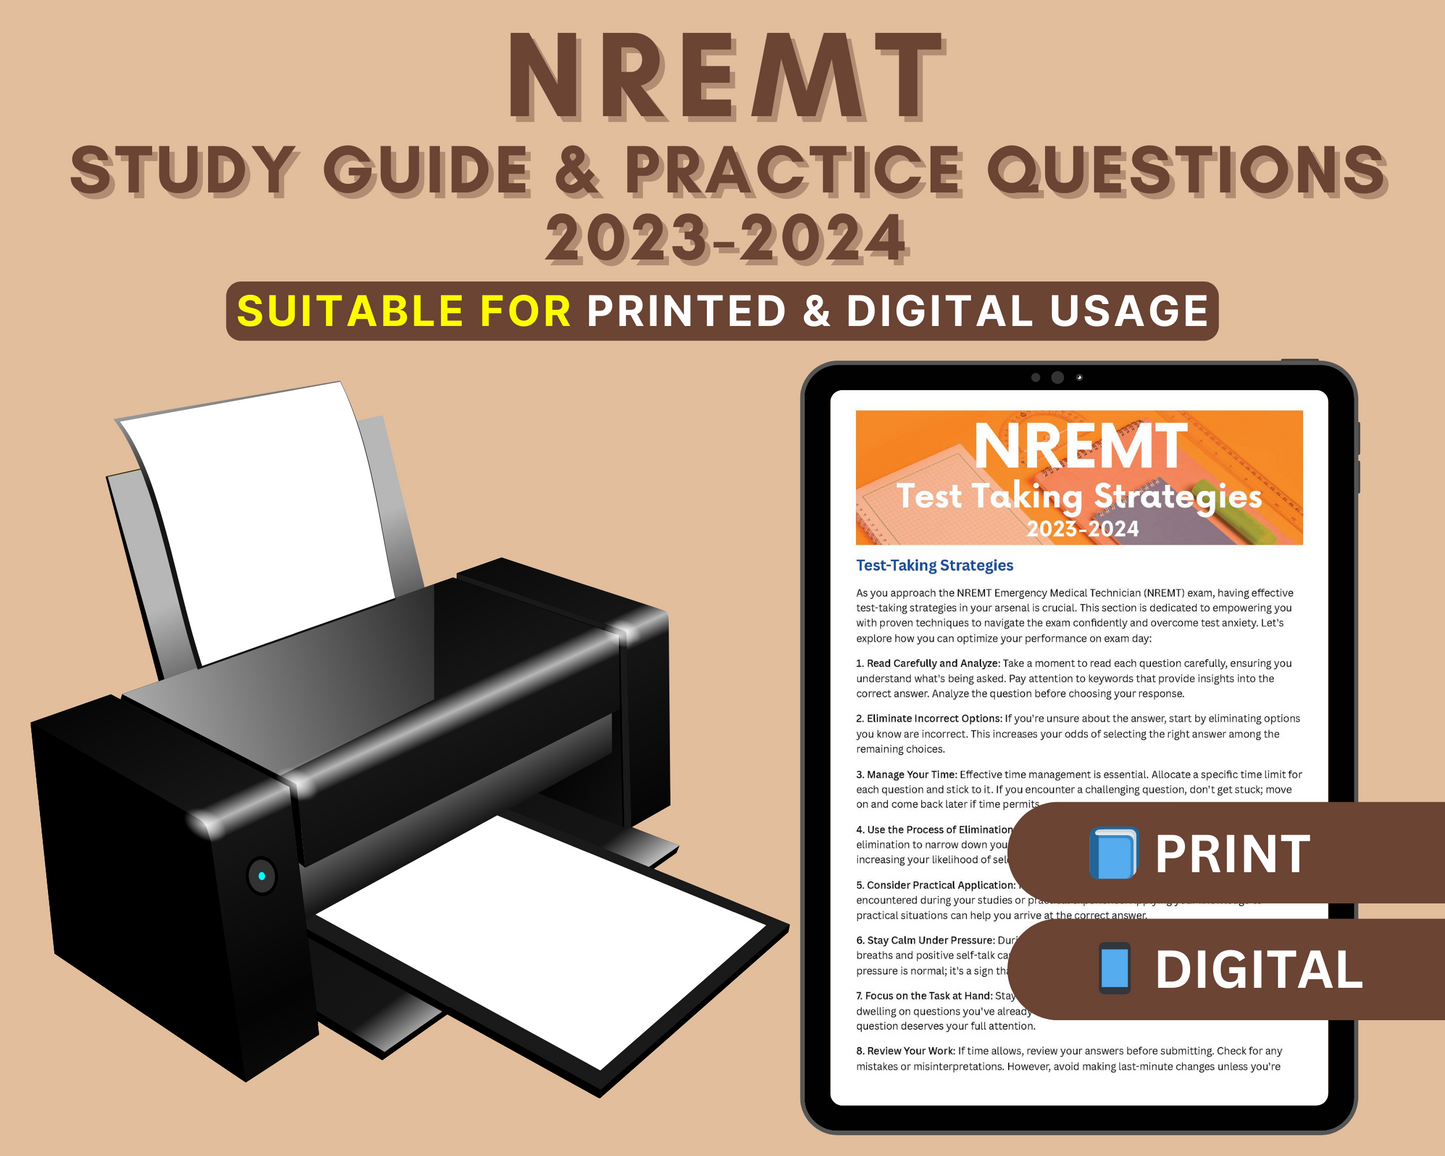 NREMT Study Guide 2023-2024: EMT Certification Prep, Medical Terminology, Pharmacology, Trauma Assessment, Practice Tests & Detailed Answers